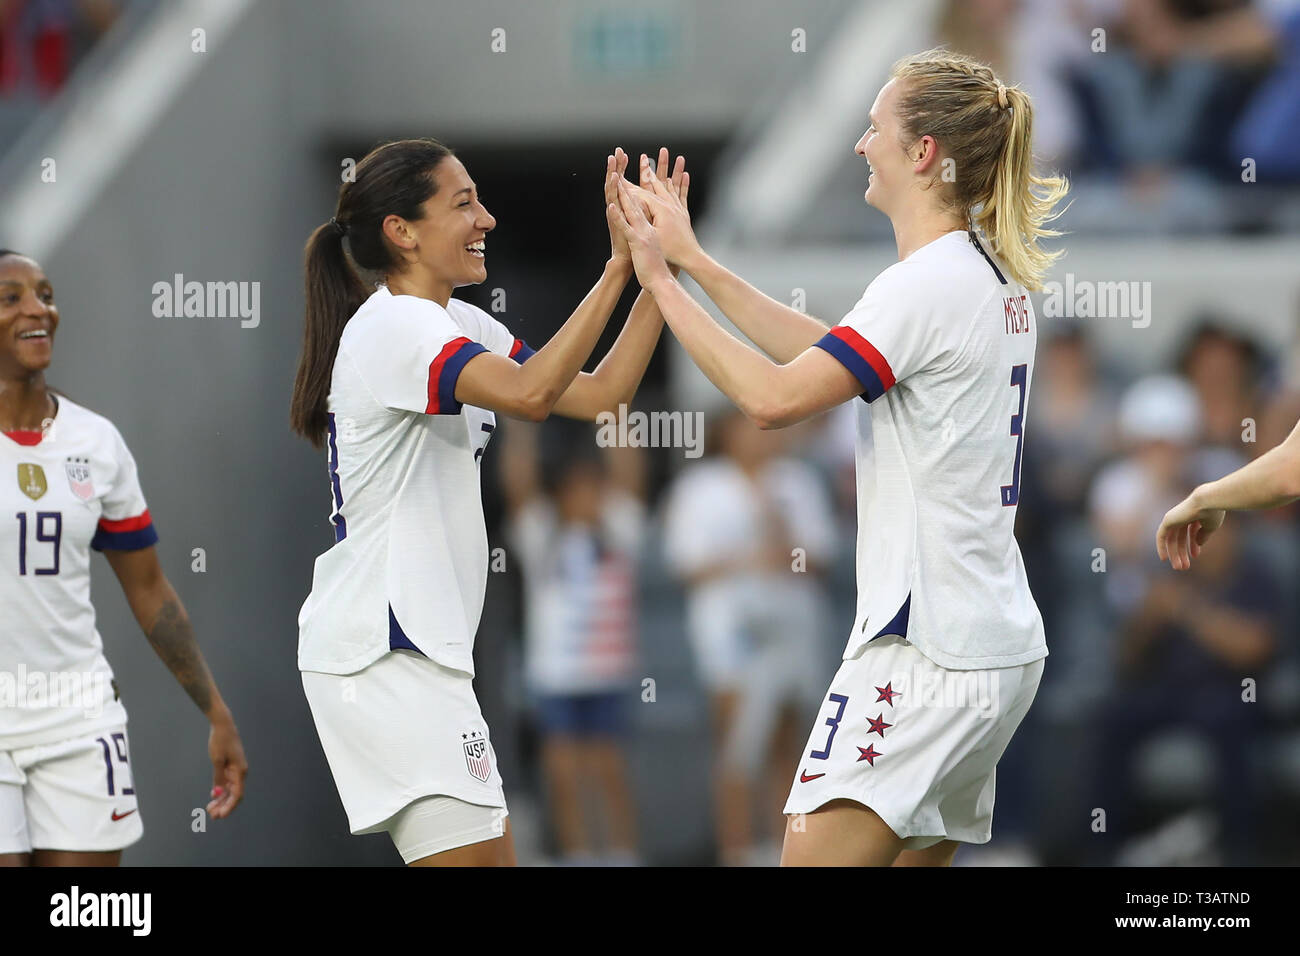 April 7, 2019:United States of America midfielder Samantha Mewis (3) gets fives from a teammate after scoring a goal in the first half during the game between Belgium and USA at Banc of California Stadium in Los Angeles, CA. USA. (Photo by Peter Joneleit) Stock Photo